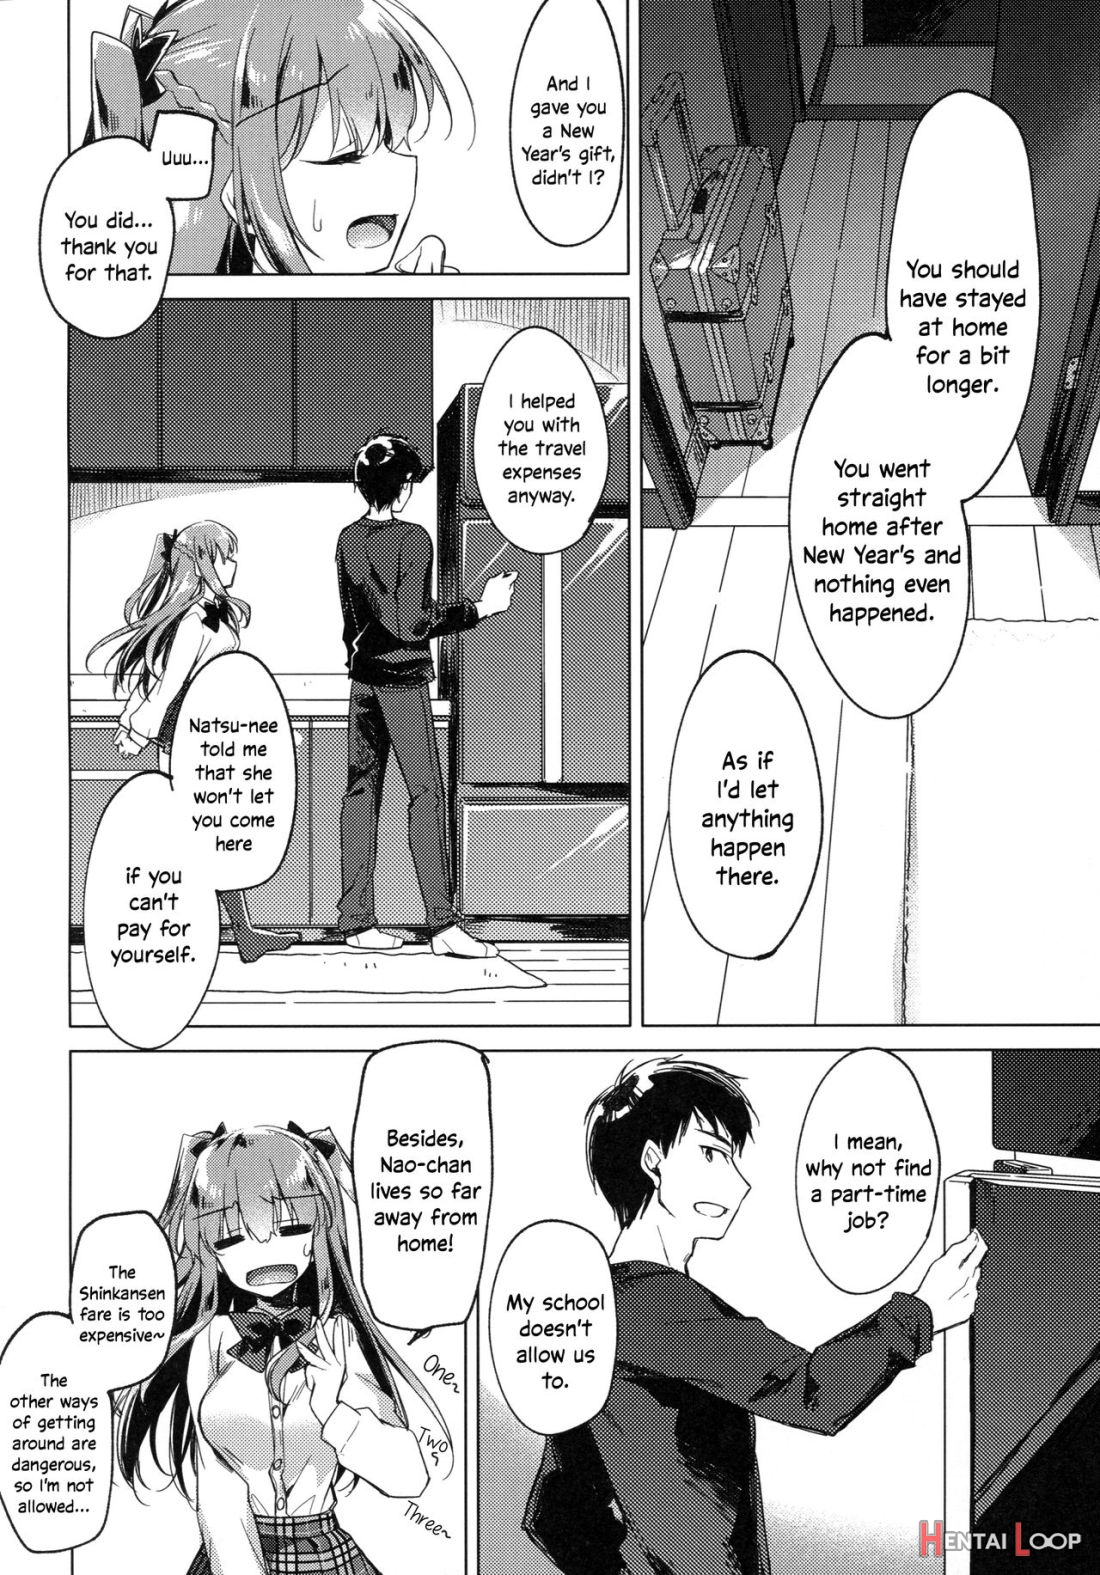 Maybe I Love You 2 page 4